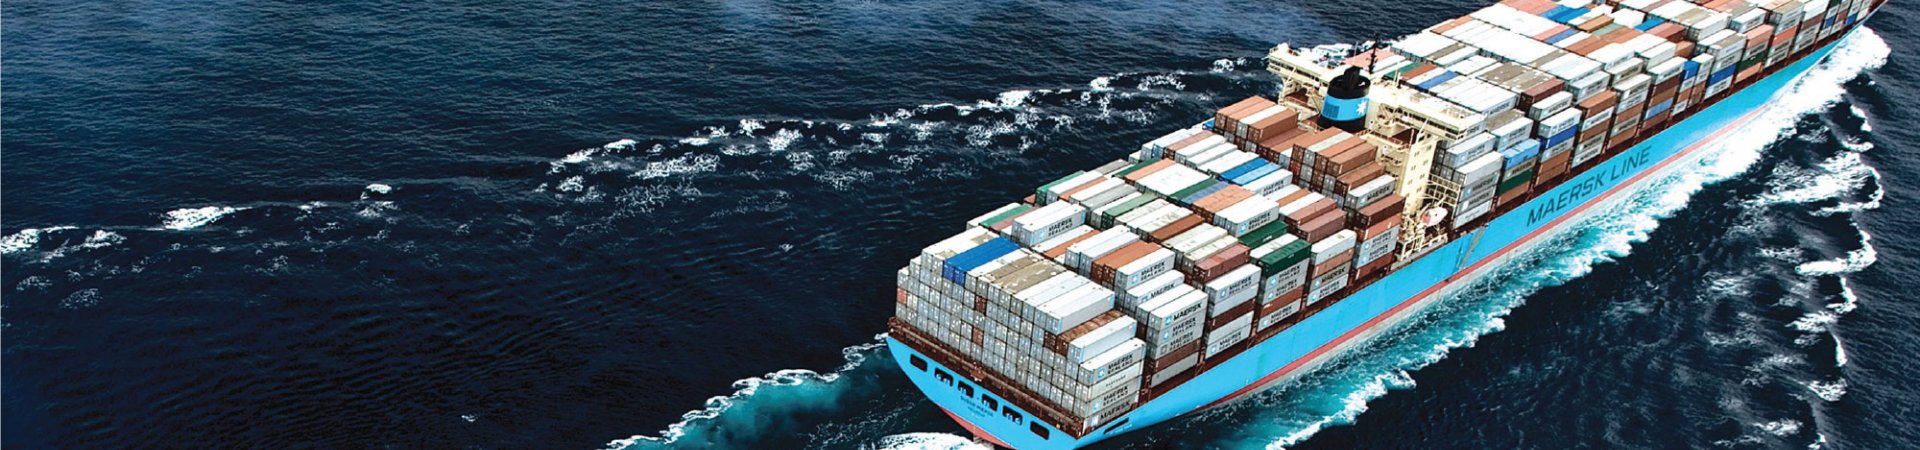 Maritime & Shipping Gauci and Partners Advocates, malta law firm, malta lawyers, legal services malta, tax services malta, corporate law malta, commercial law malta, finance law malta, marine law malta